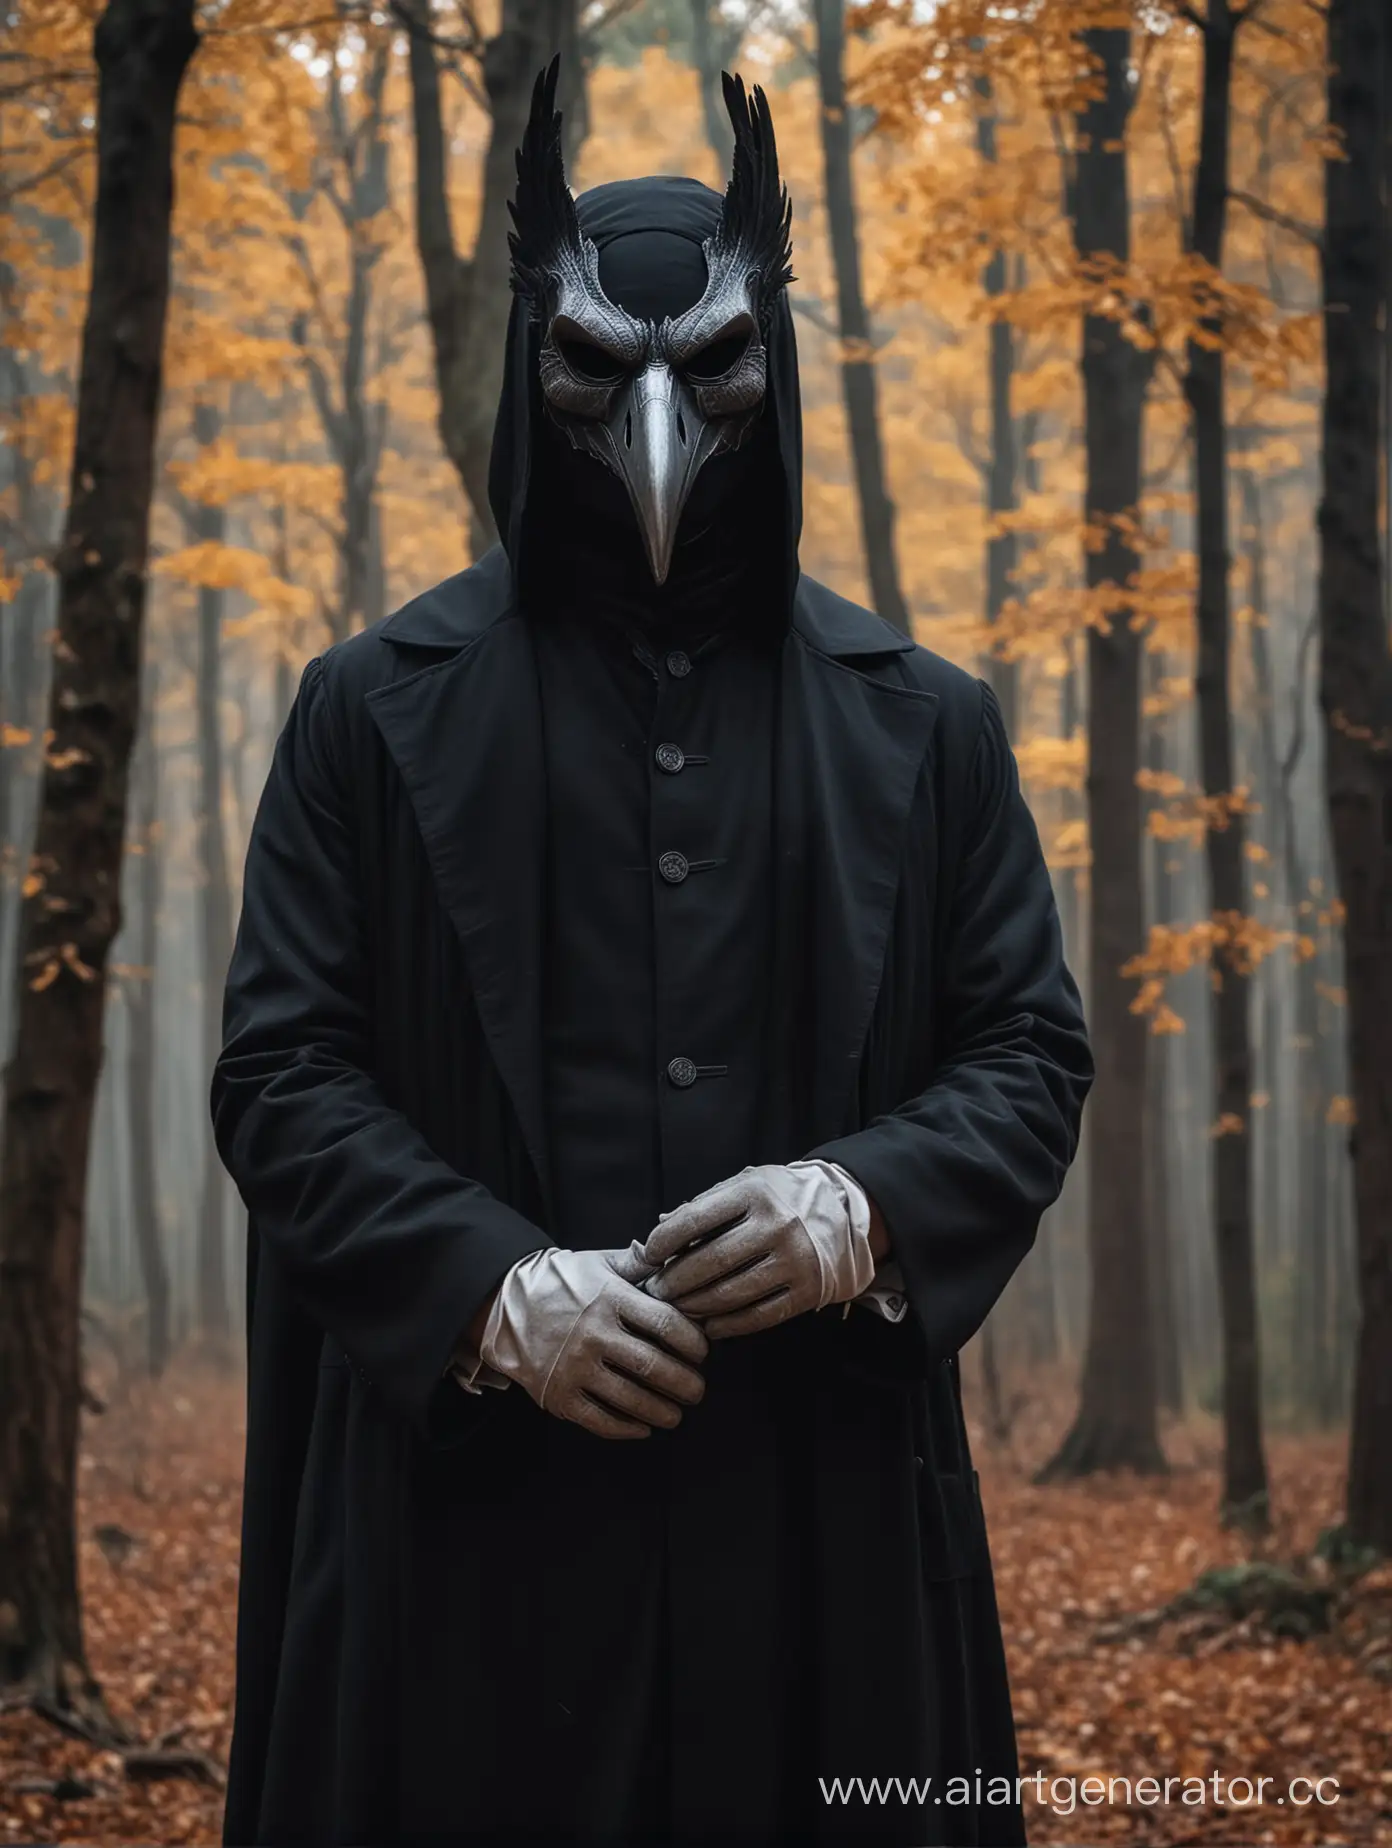 Majestic-Raven-Masked-Figure-in-Autumn-Forest-Night